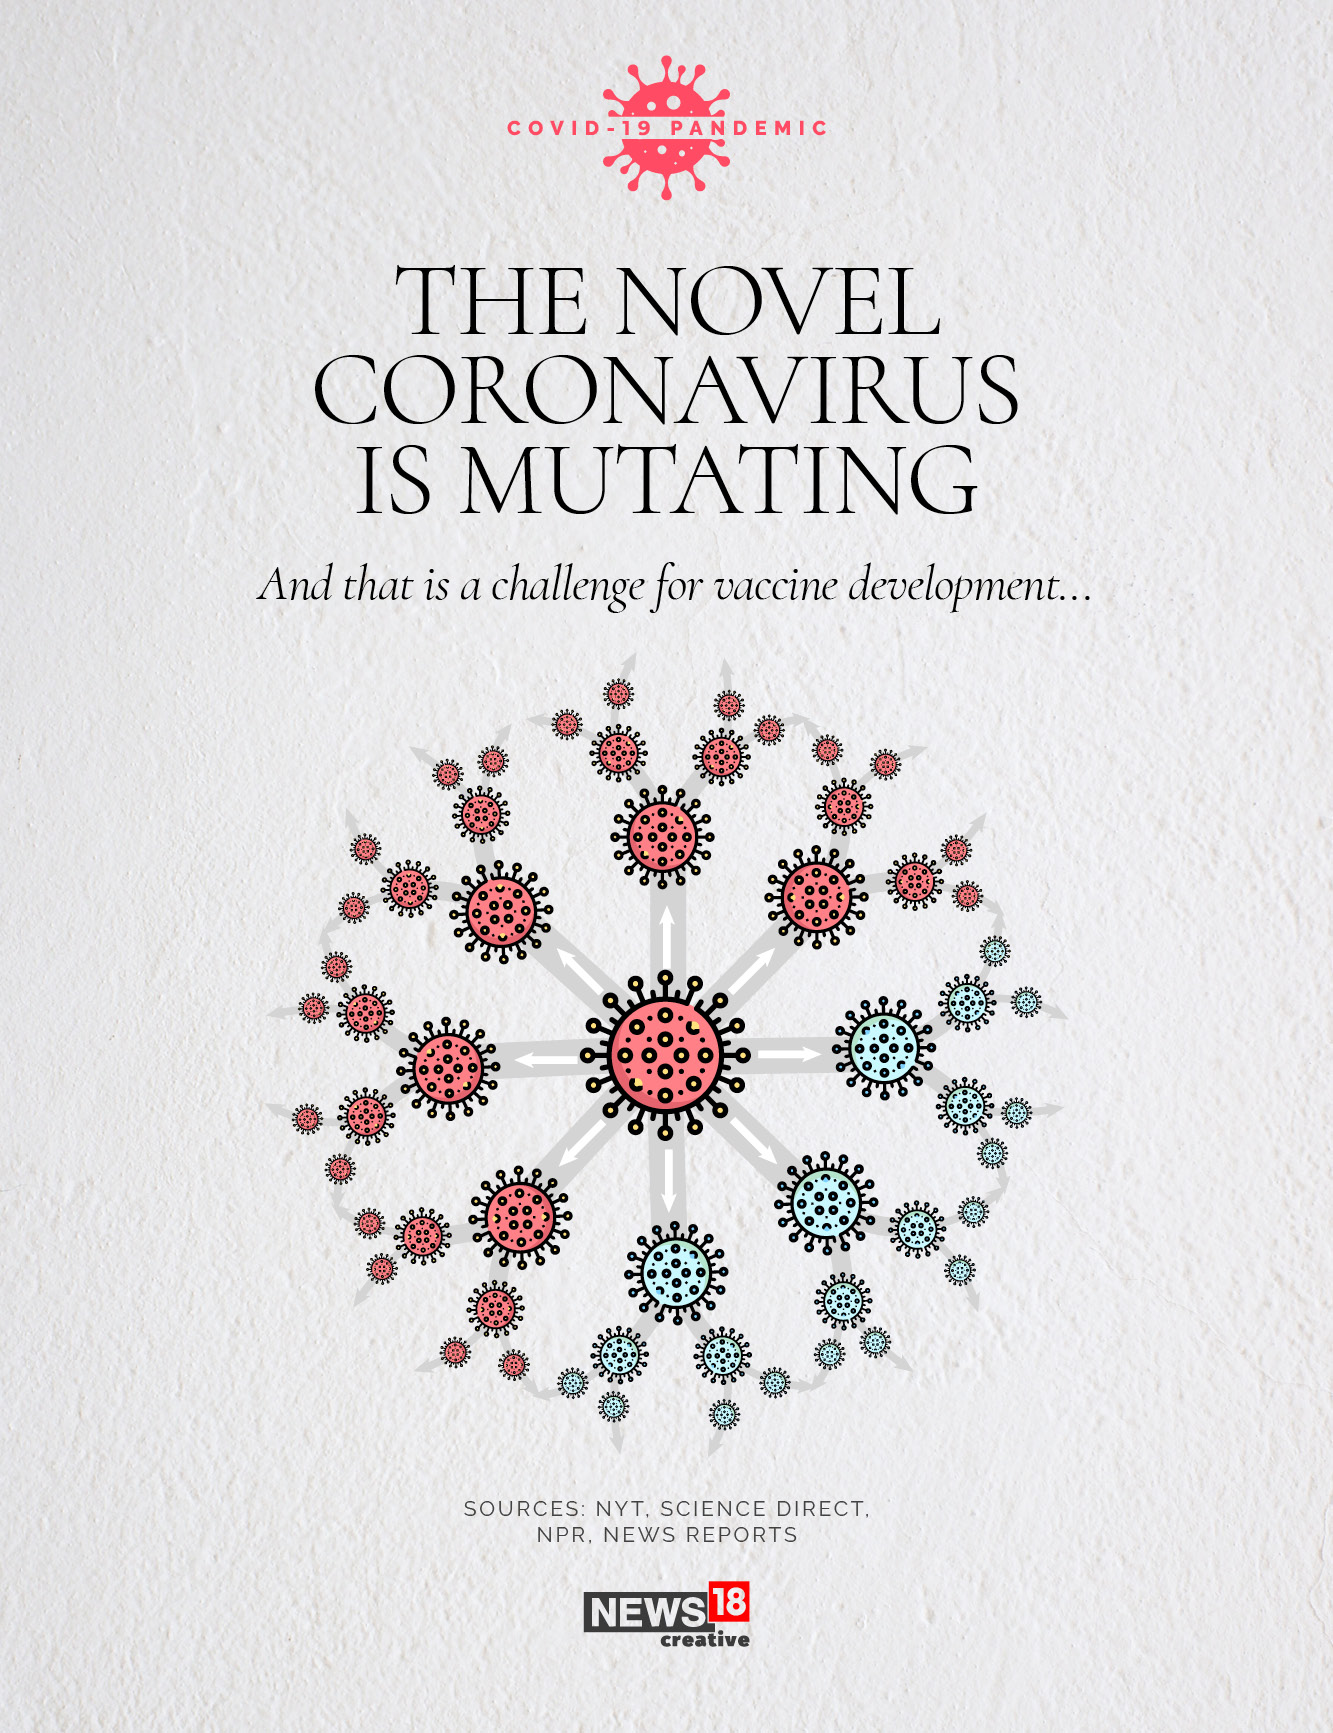 The novel coronavirus is mutating: What this means